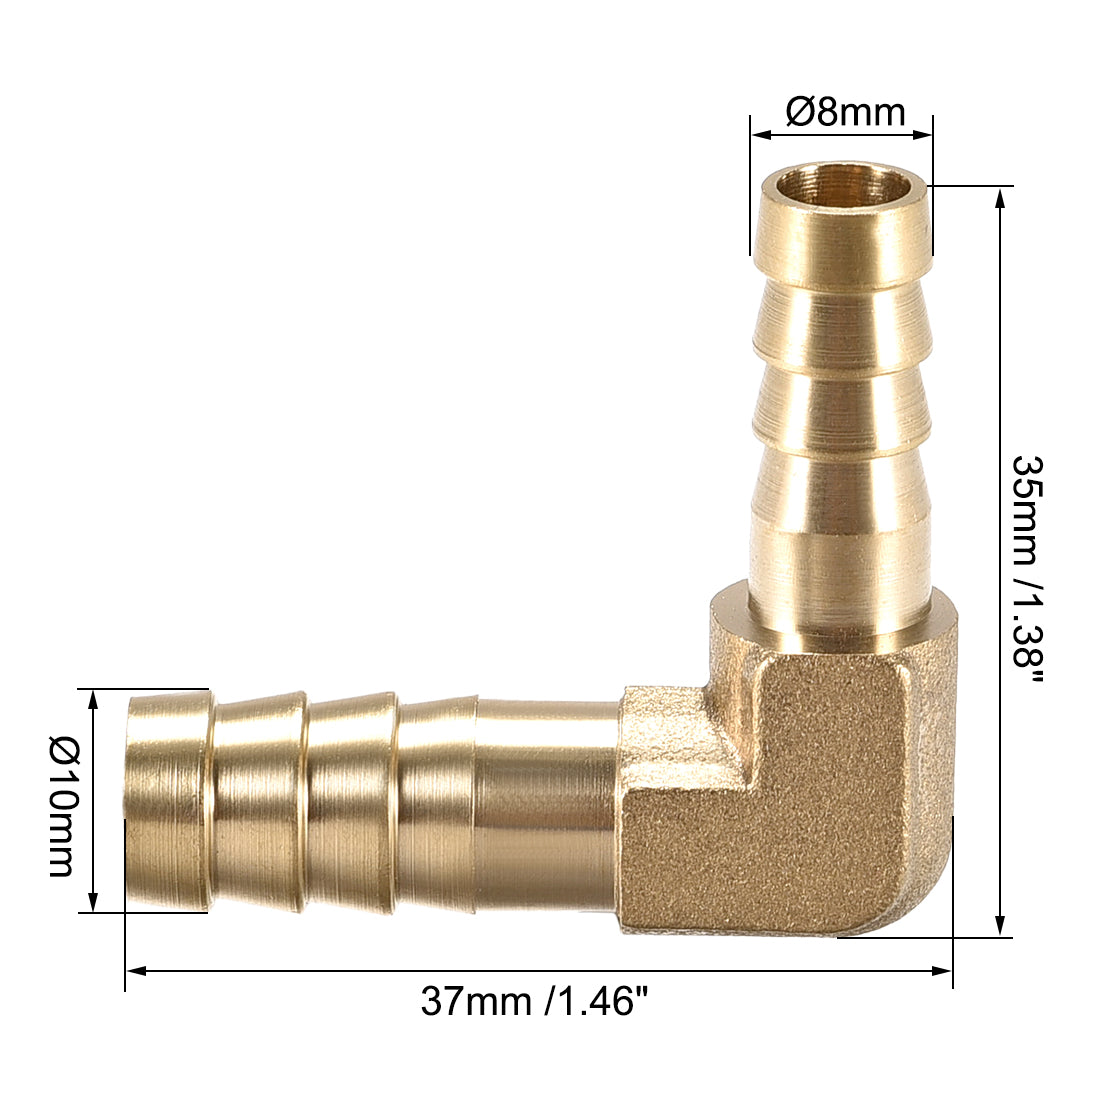 Uxcell Uxcell 8mm to 4mm Barb Brass Hose Fitting 90 Degree Elbow Pipe Connector Coupler 2pcs